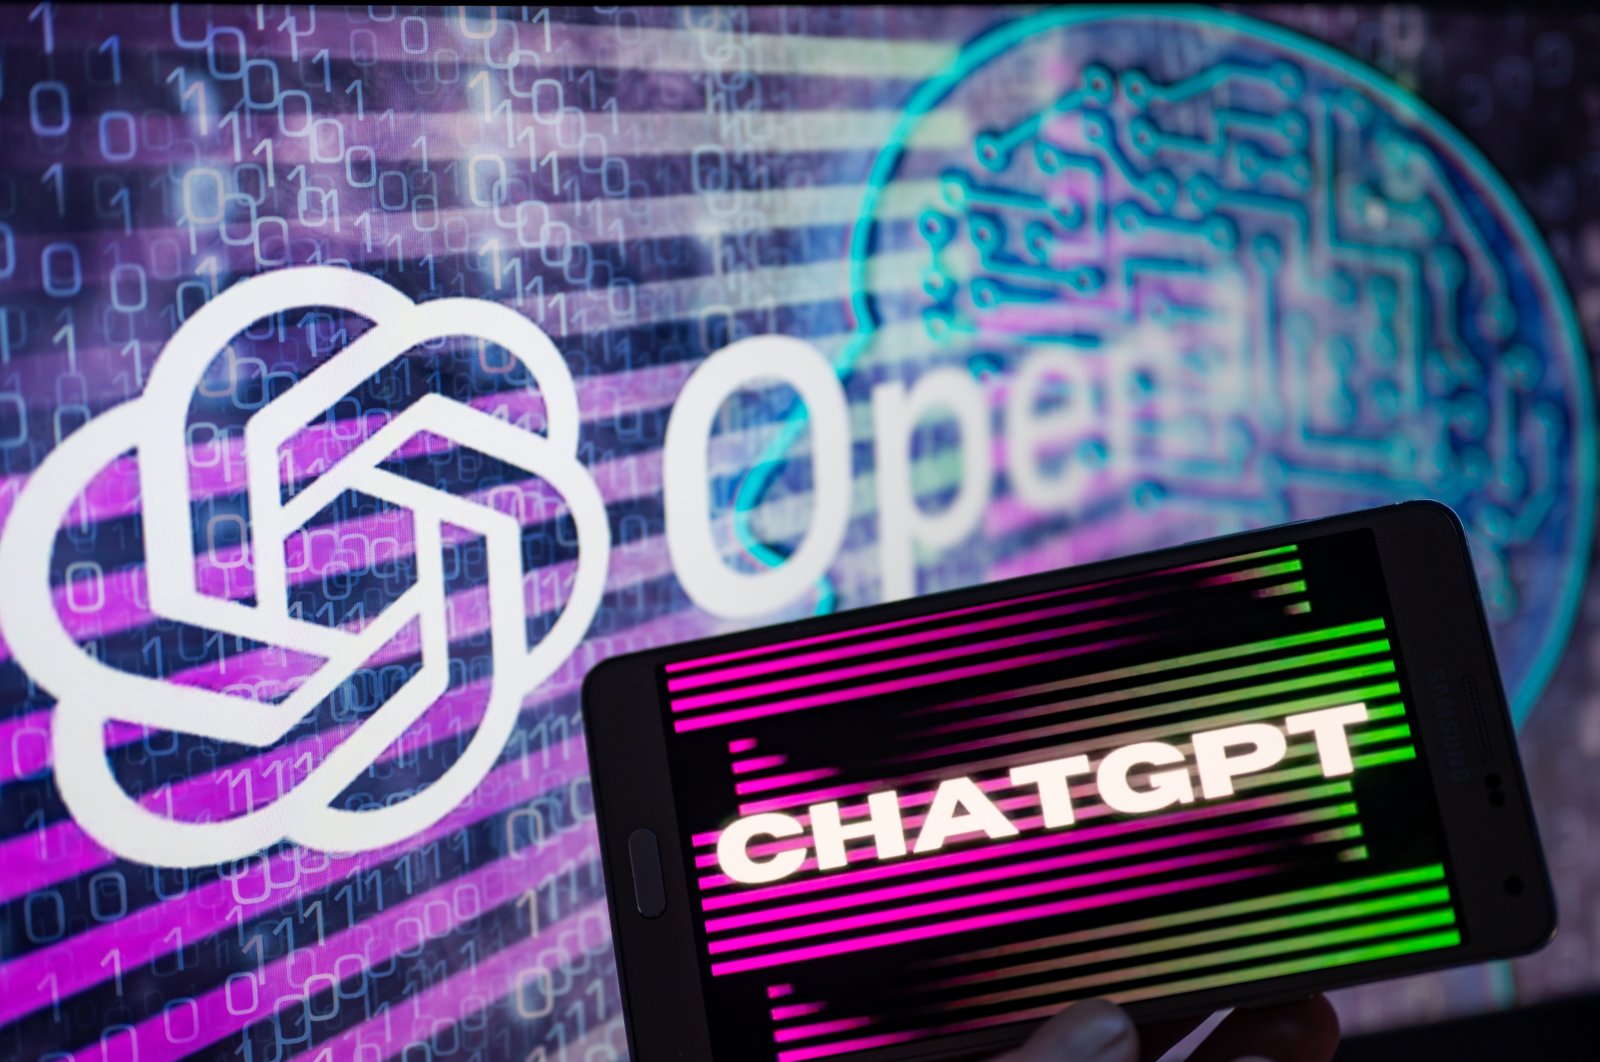 The OpenAI logo is seen on a large screen with the ChatGPT website displayed on a nearby mobile device in this illustration taken in Brussels, Belgium, Jan. 8, 2023. (Getty Images Photo)